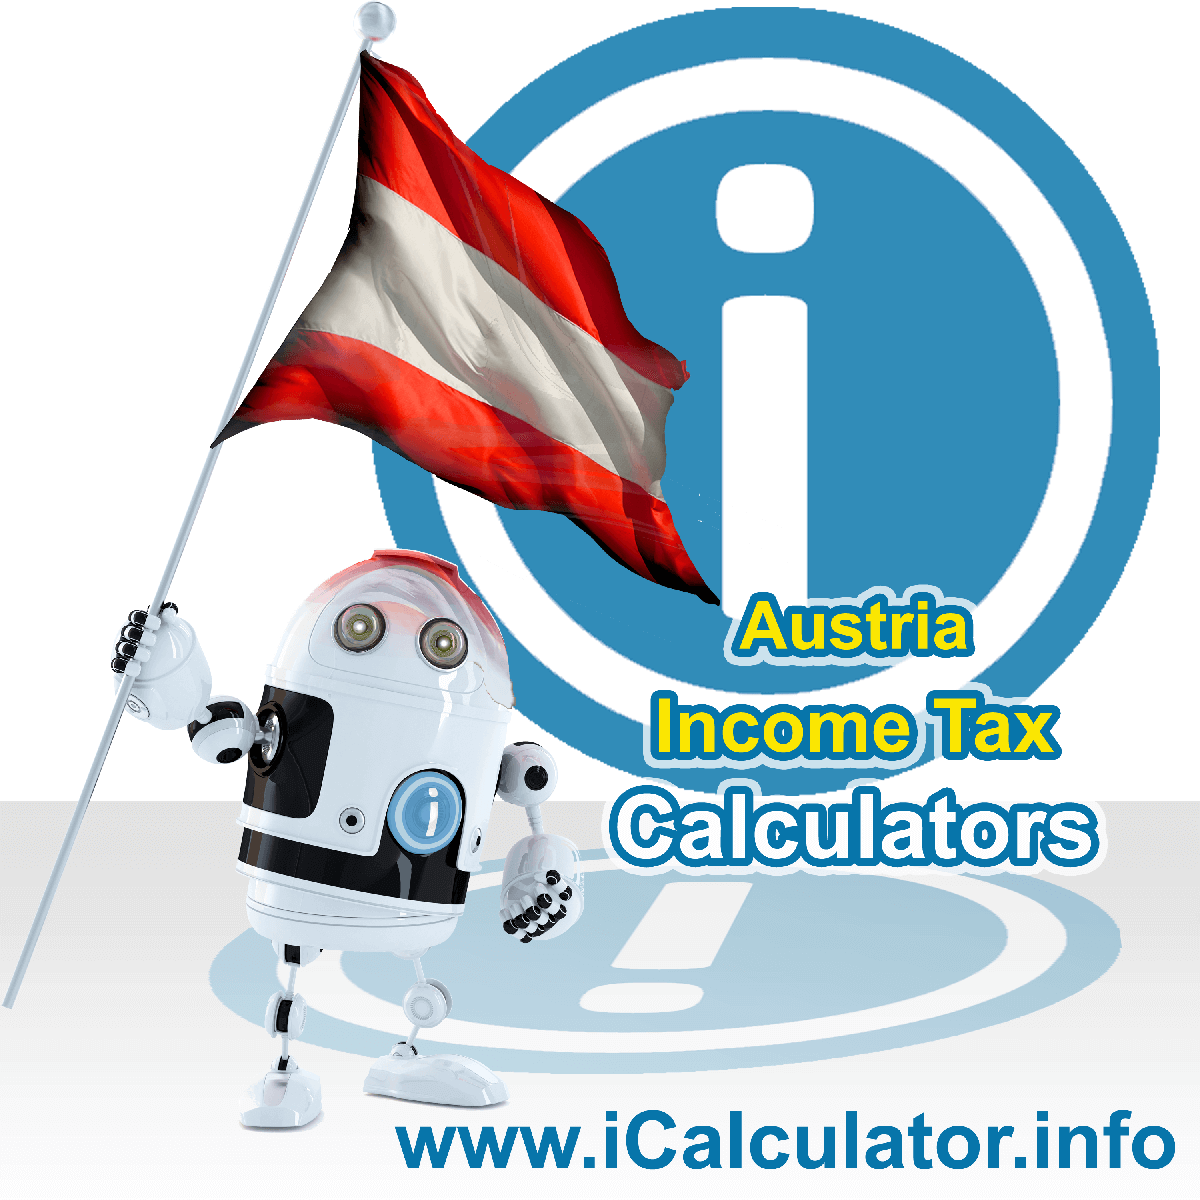 Austria Income Tax Calculator. This image shows a new employer in Austria calculating the annual payroll costs based on multiple payroll payments in one year in Austria using the Austria income tax calculator to understand their payroll costs in Austria in 2023